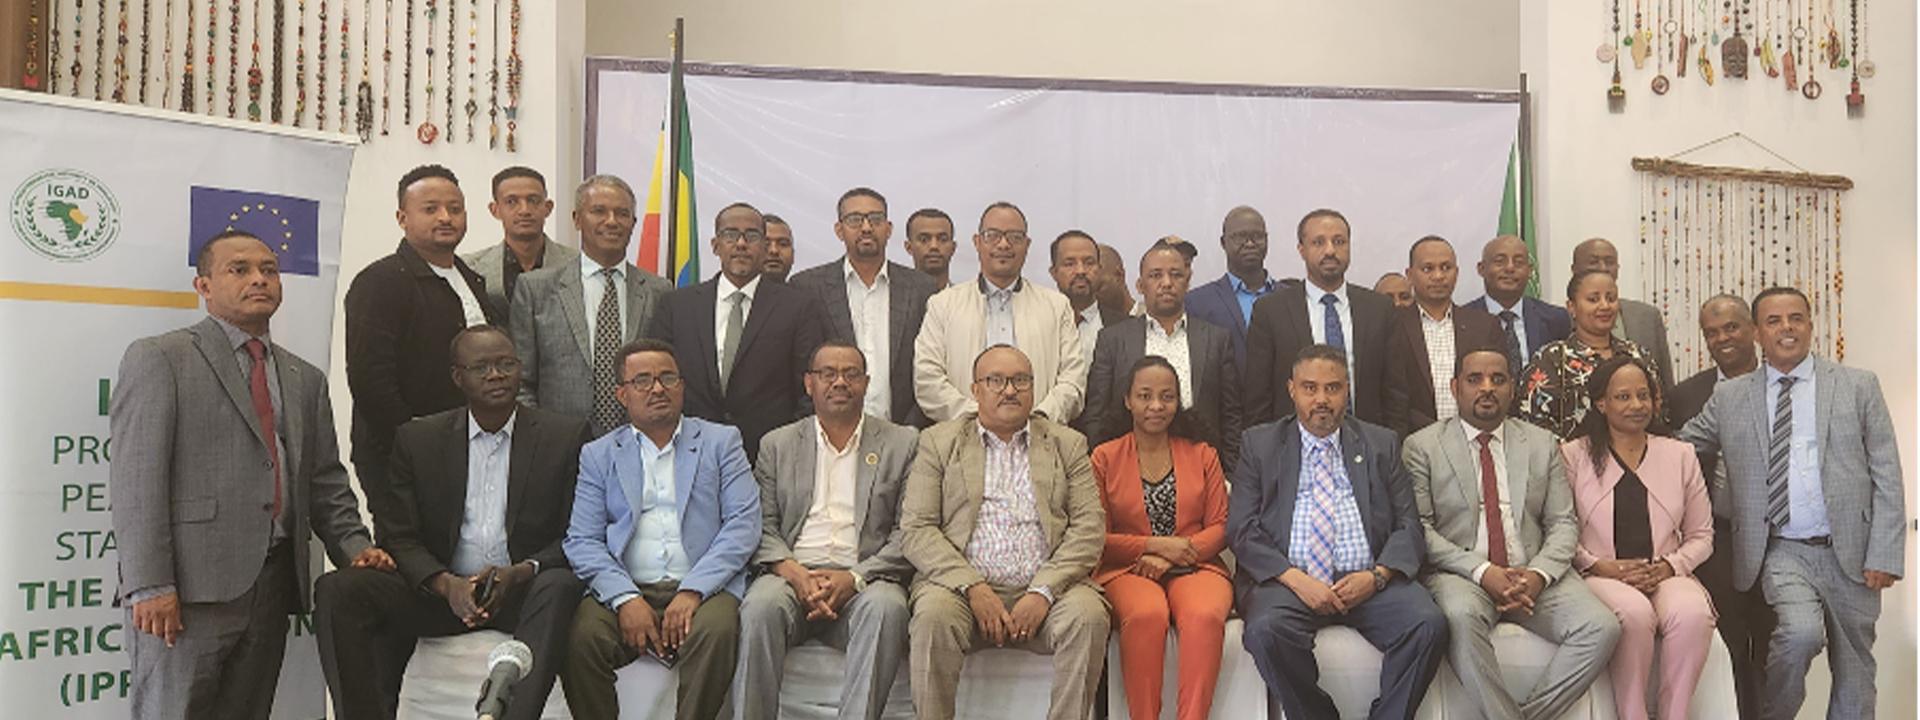 IGAD SSP Holds a Ethiopia National Workshop for Federal and Regional Security Sector Officials to Promote Interagency Cooperation and Coordination in Addressing the Transnational Security Threats